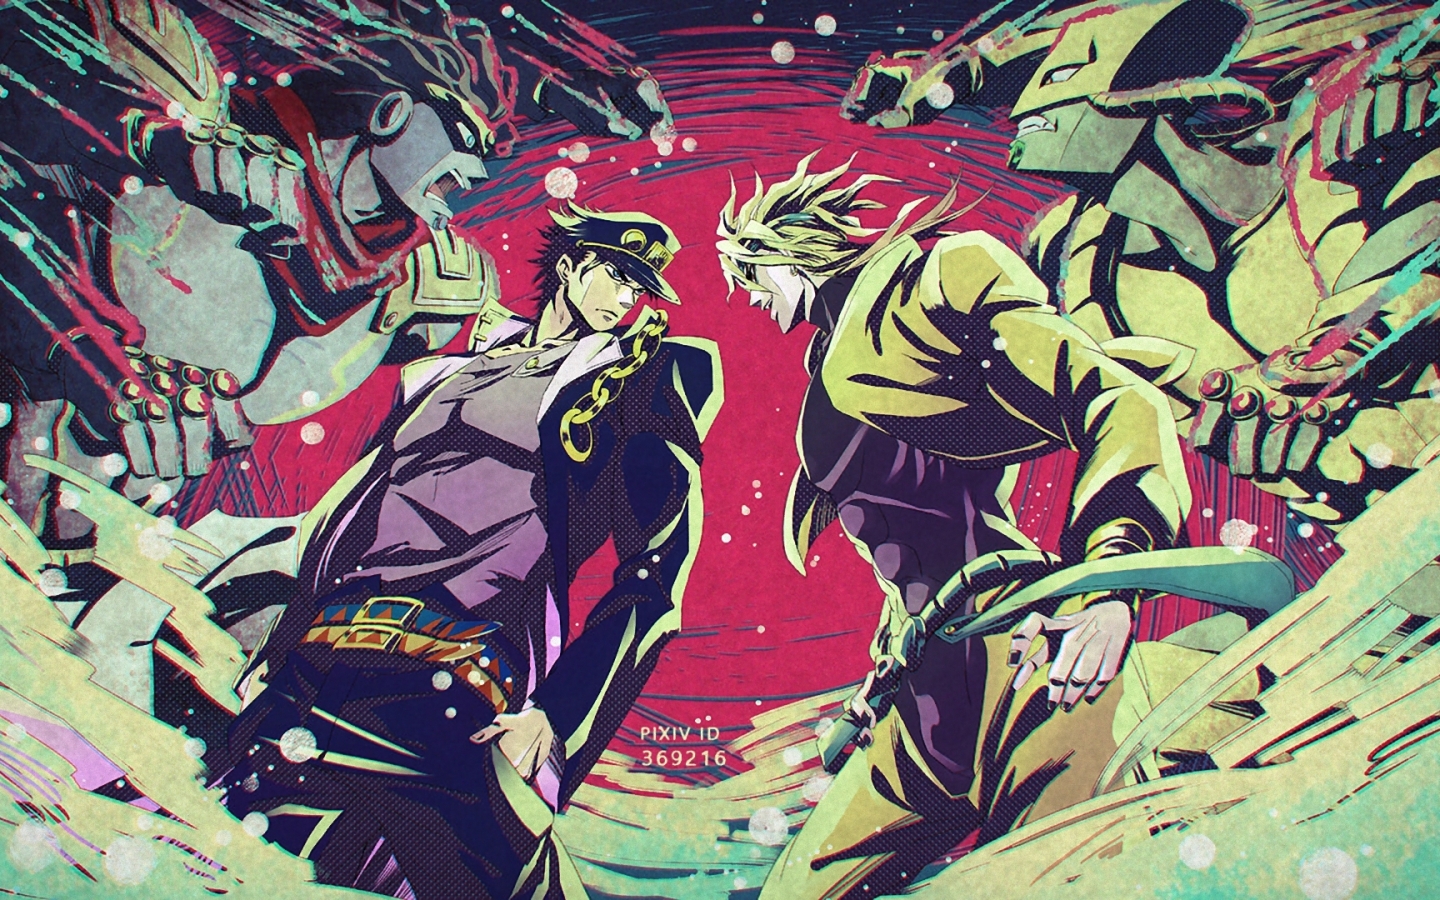 1440x900 Jojo S Bizarre Adventure Stardust Crusaders 1440x900 Wallpaper Hd Anime 4k Wallpapers Images Photos And Background Wallpapers Den